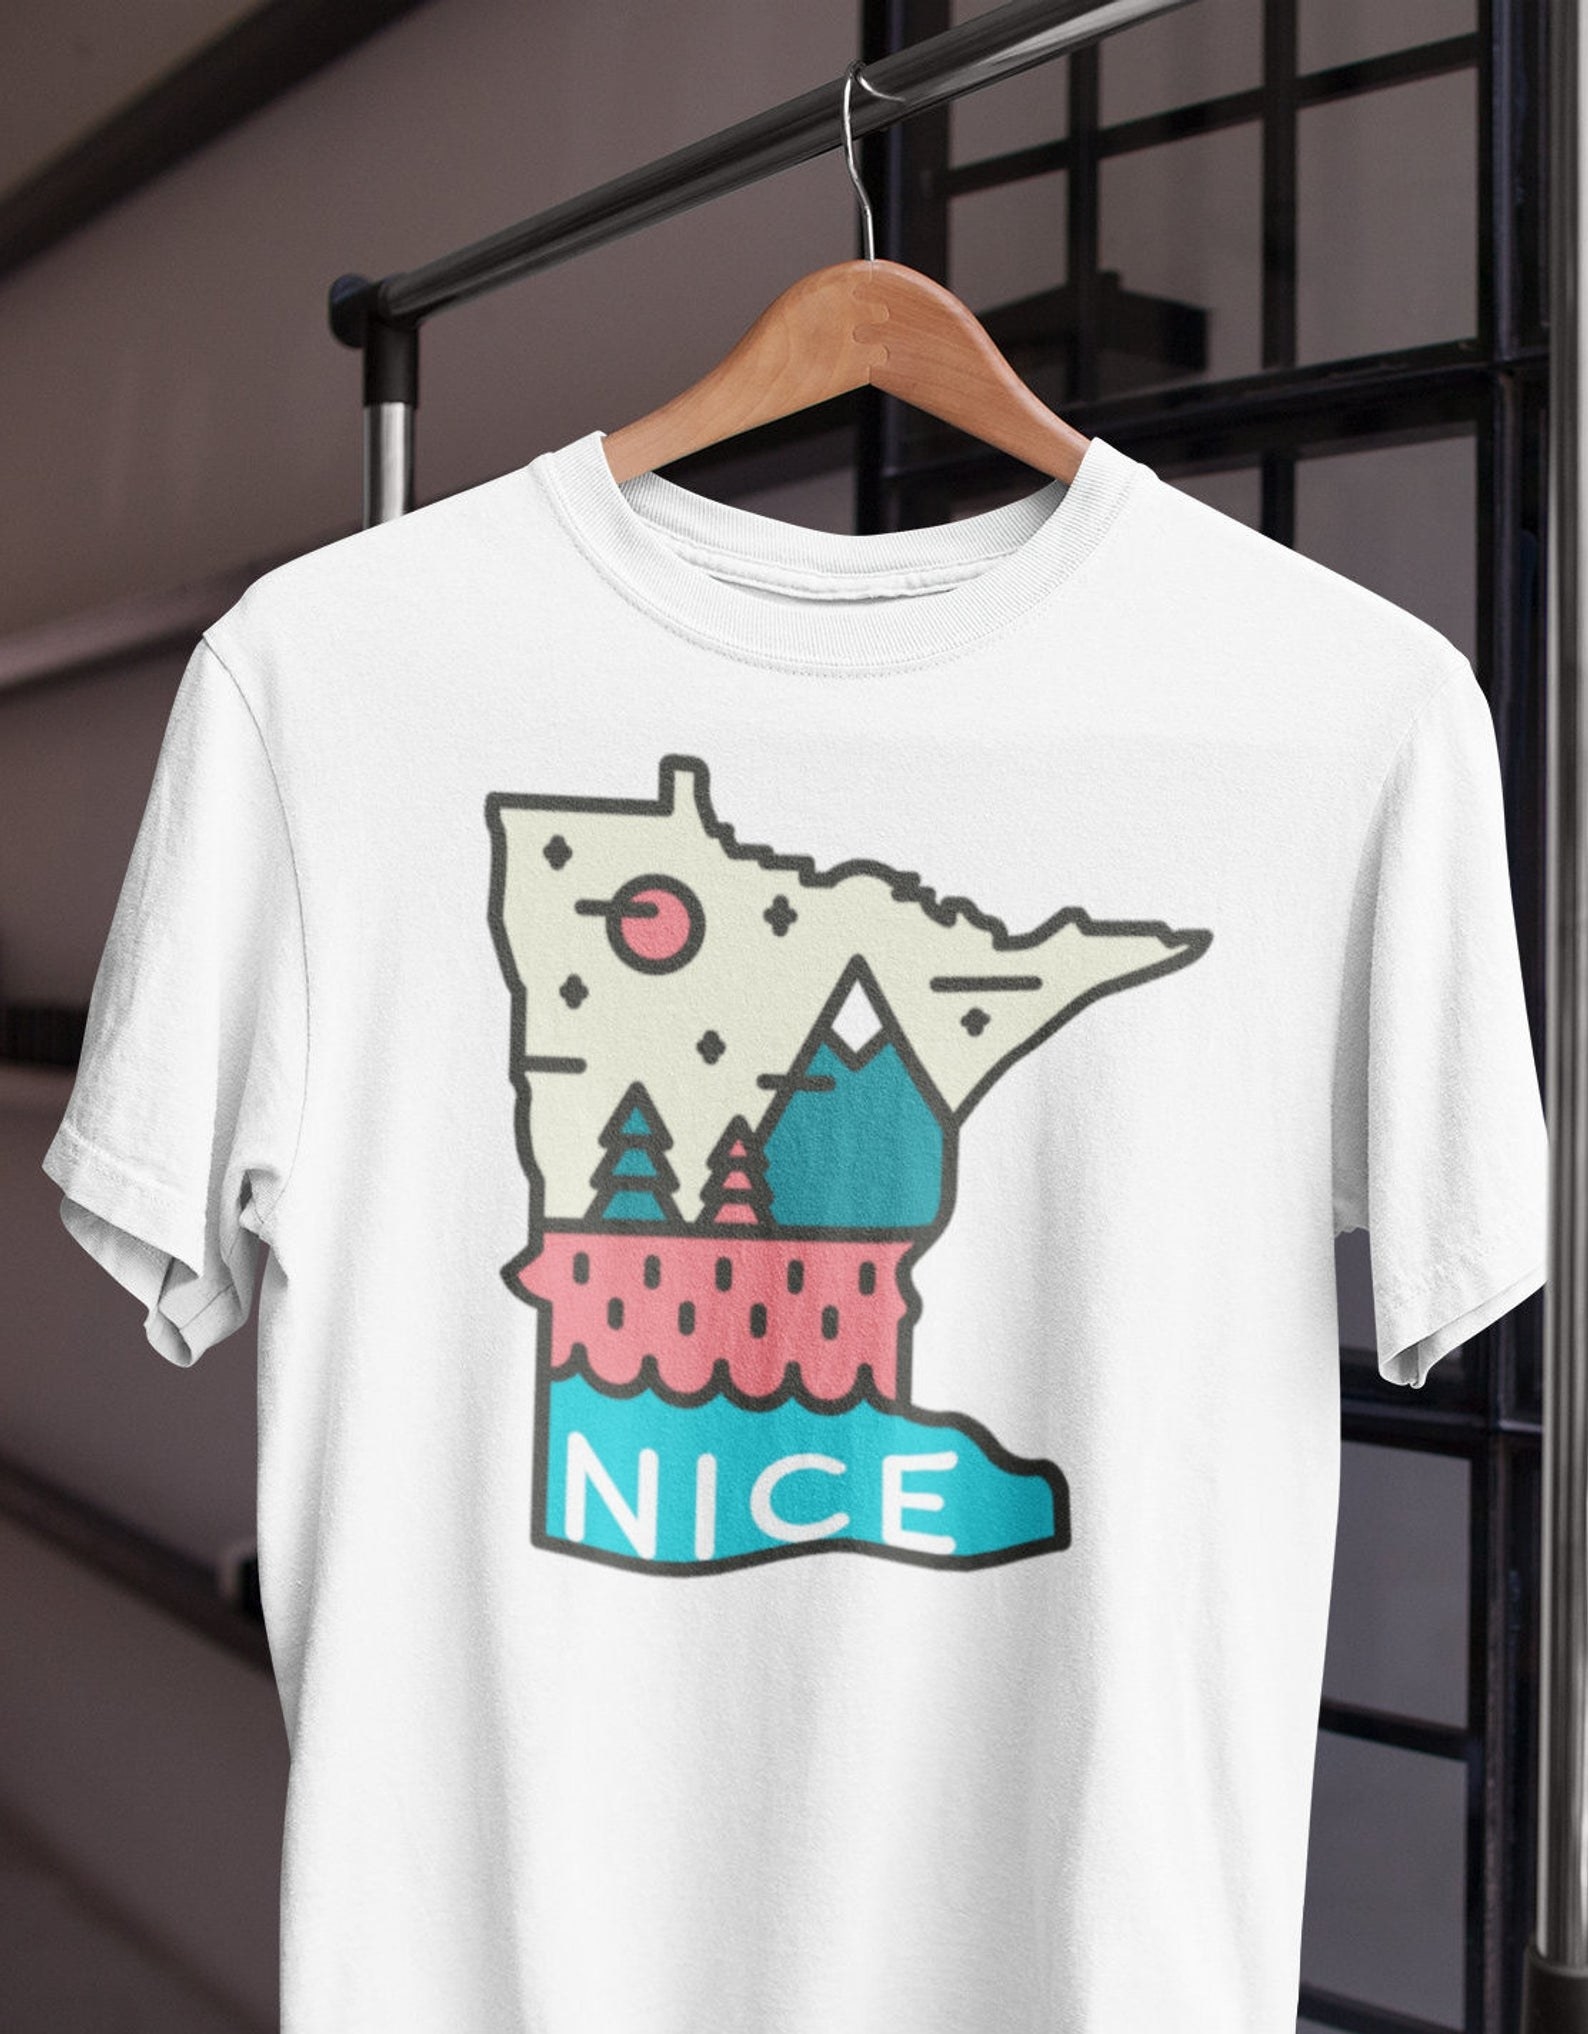 Best Souvenir T-Shirts in the Midwest